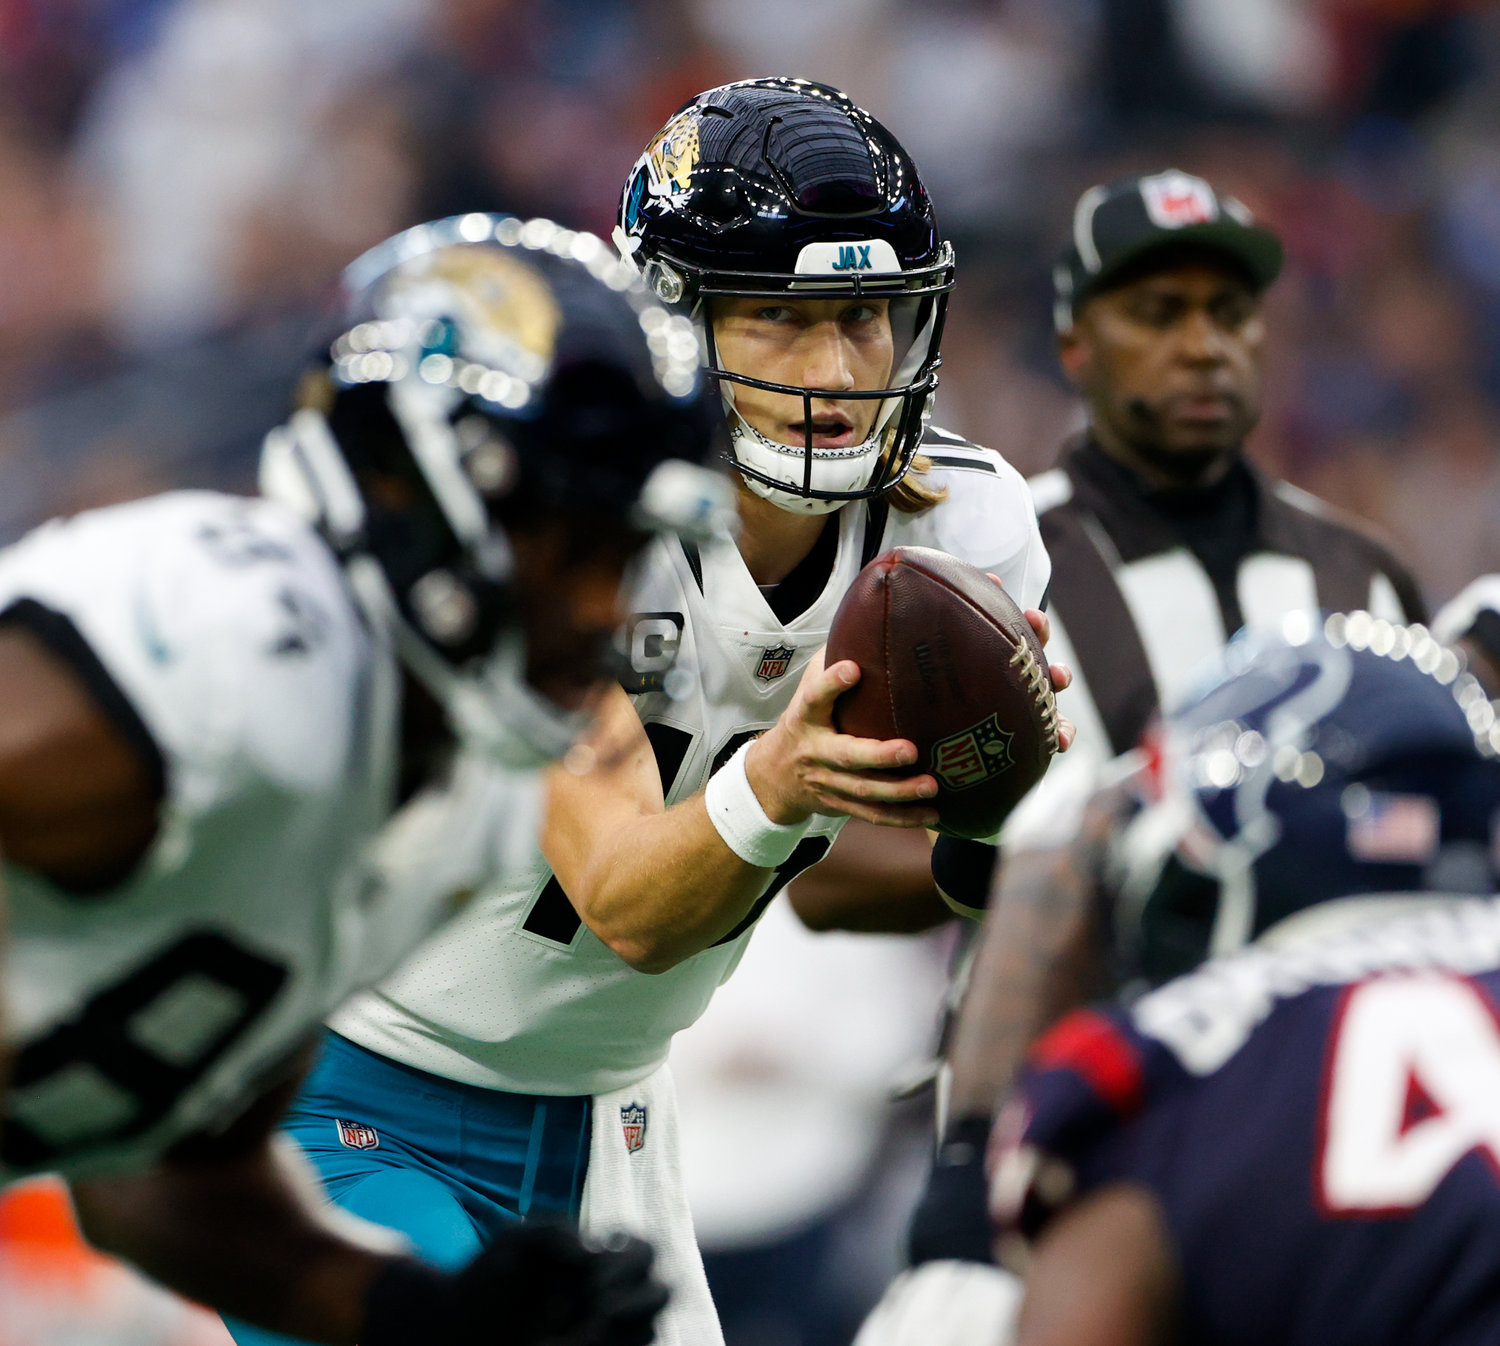 Jaguars quarterback Trevor Lawrence (16) takes the snap during an NFL game between the Houston Texans and the Jacksonville Jaguars on Jan. 1, 2023 in Houston. The Jaguars won, 31-3.